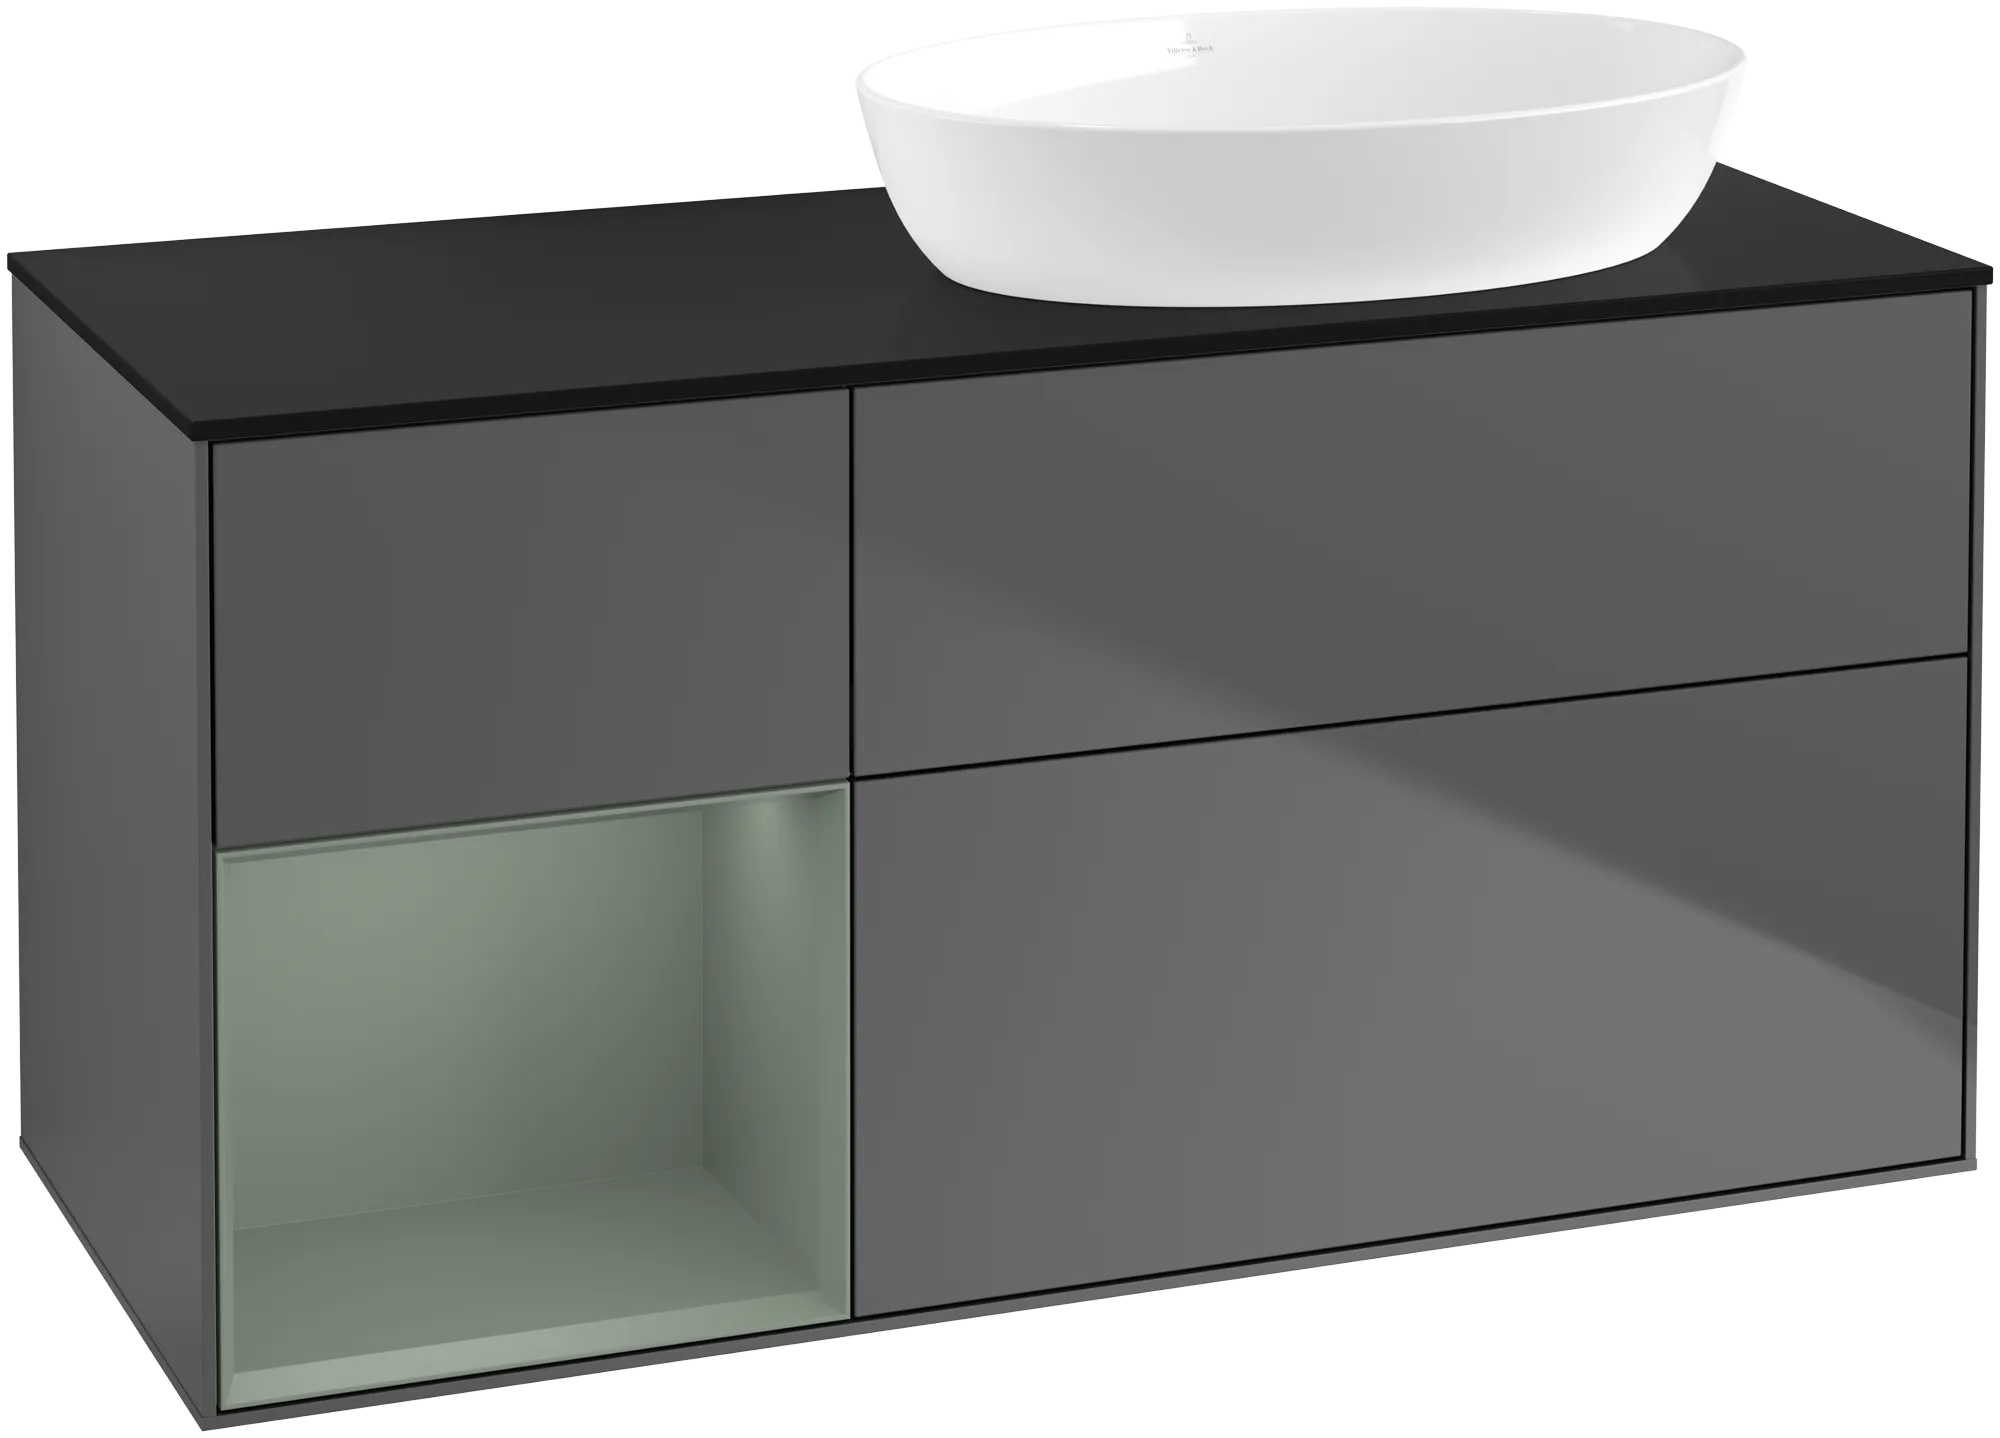 Picture of VILLEROY BOCH Finion Vanity unit, with lighting, 3 pull-out compartments, 1200 x 603 x 501 mm, Anthracite Matt Lacquer / Olive Matt Lacquer / Glass Black Matt #GA42GMGK